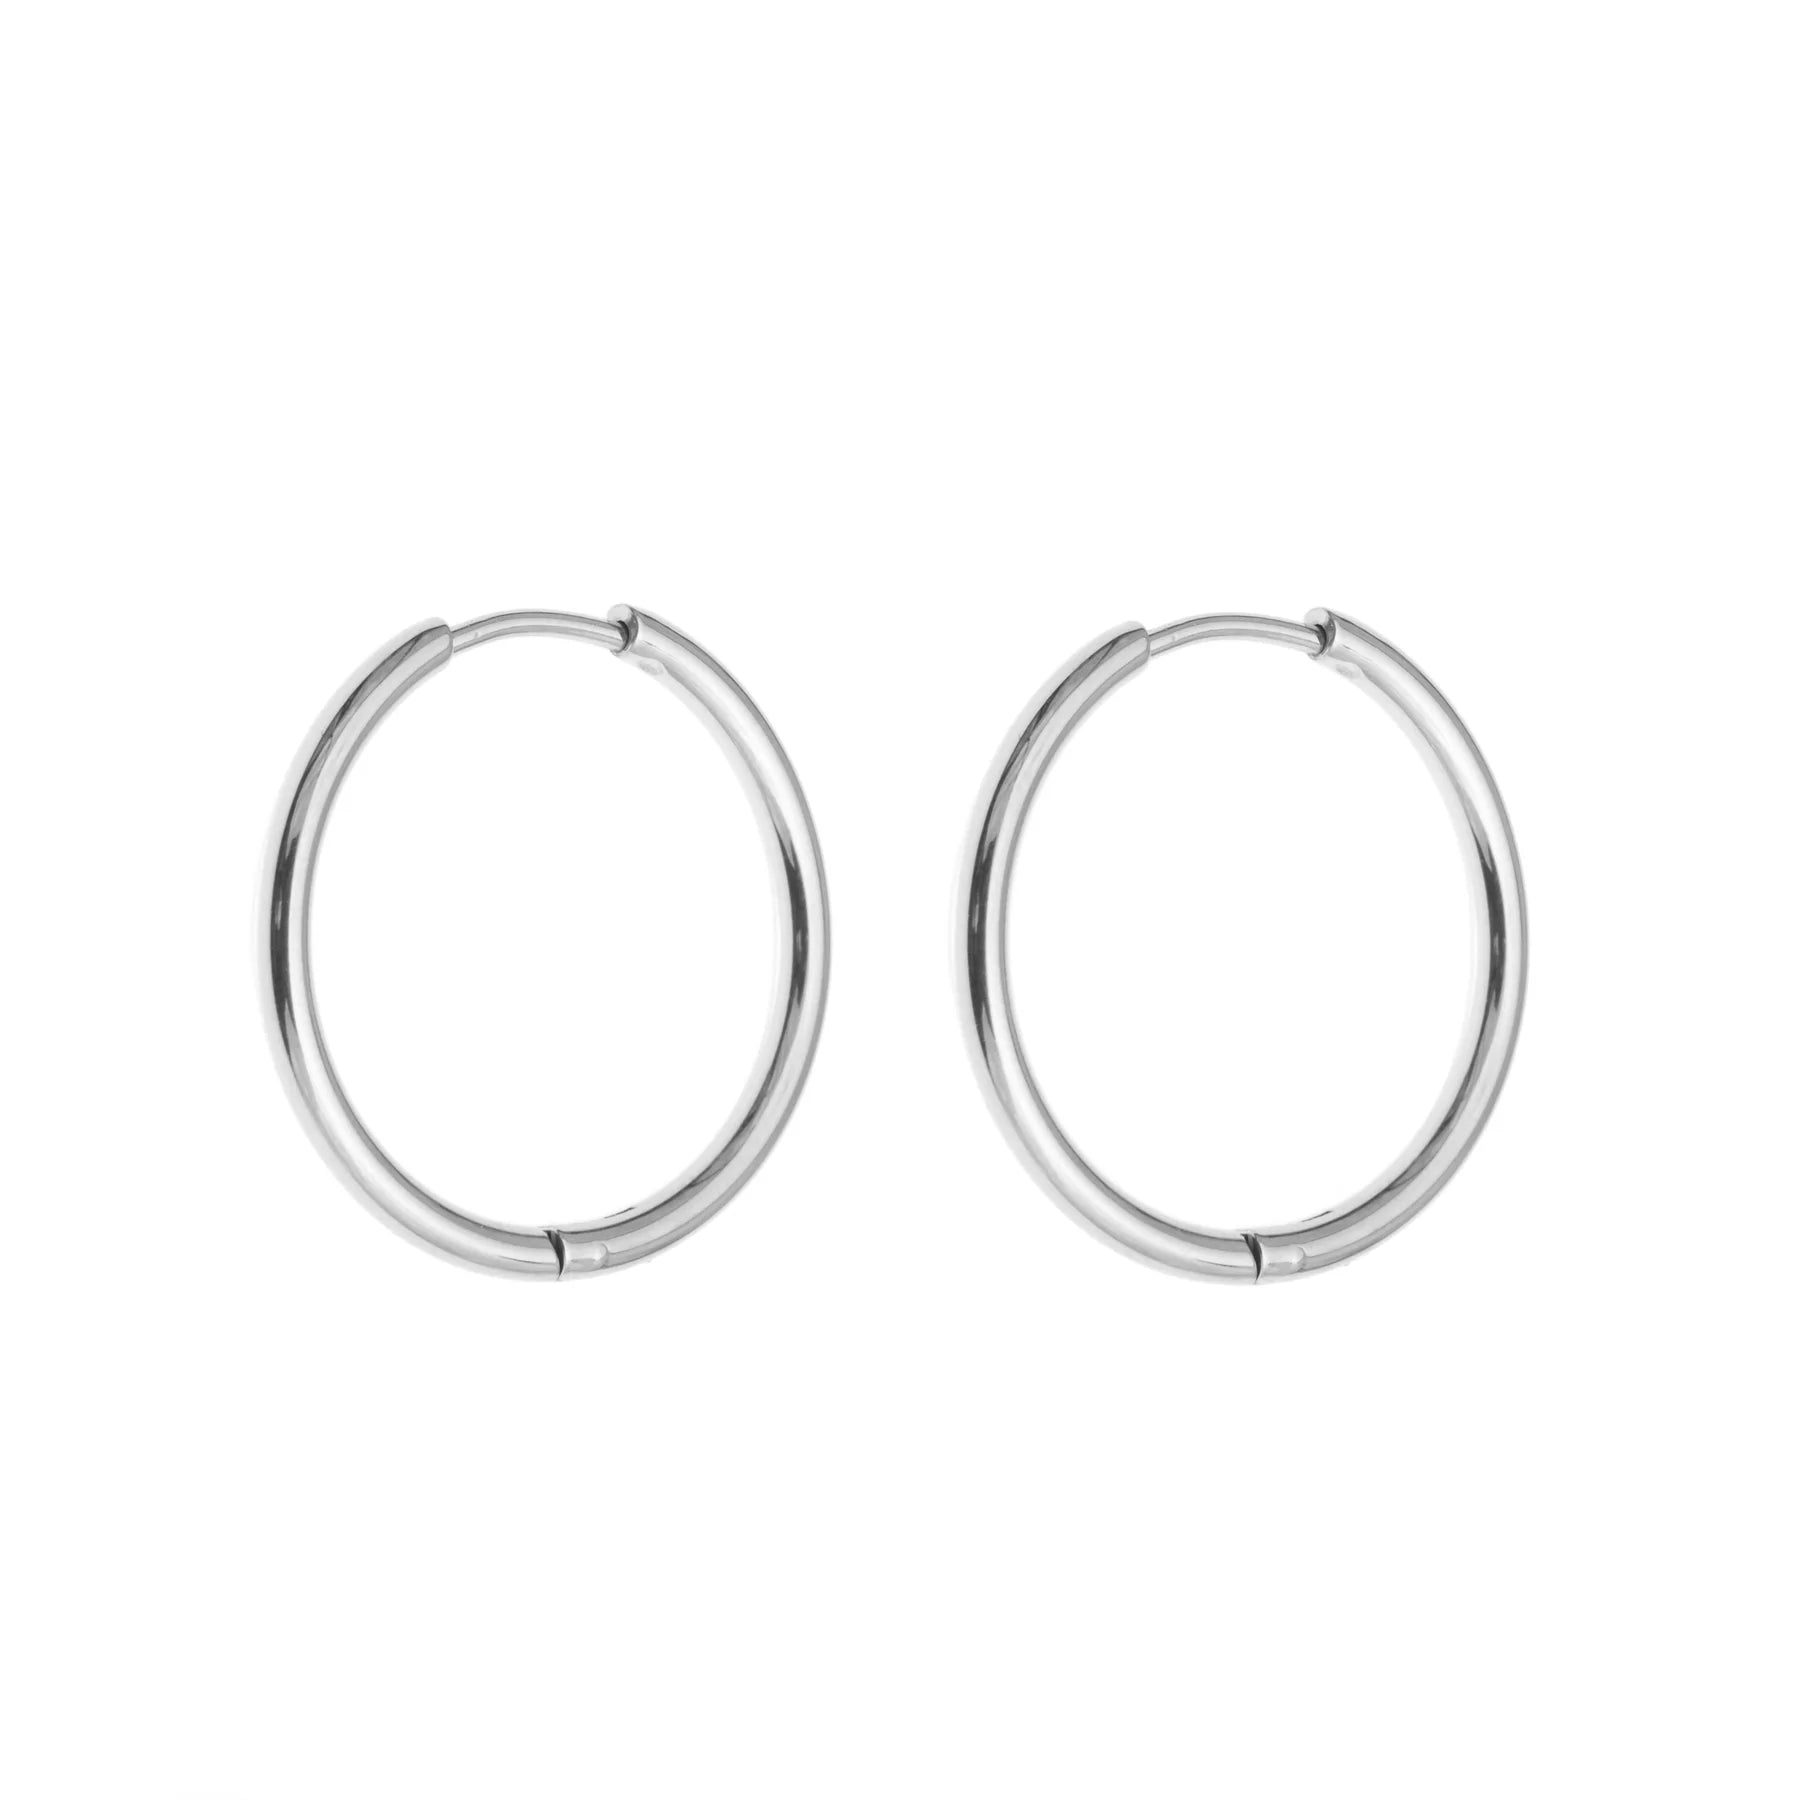 Middle Hoop Round Silver